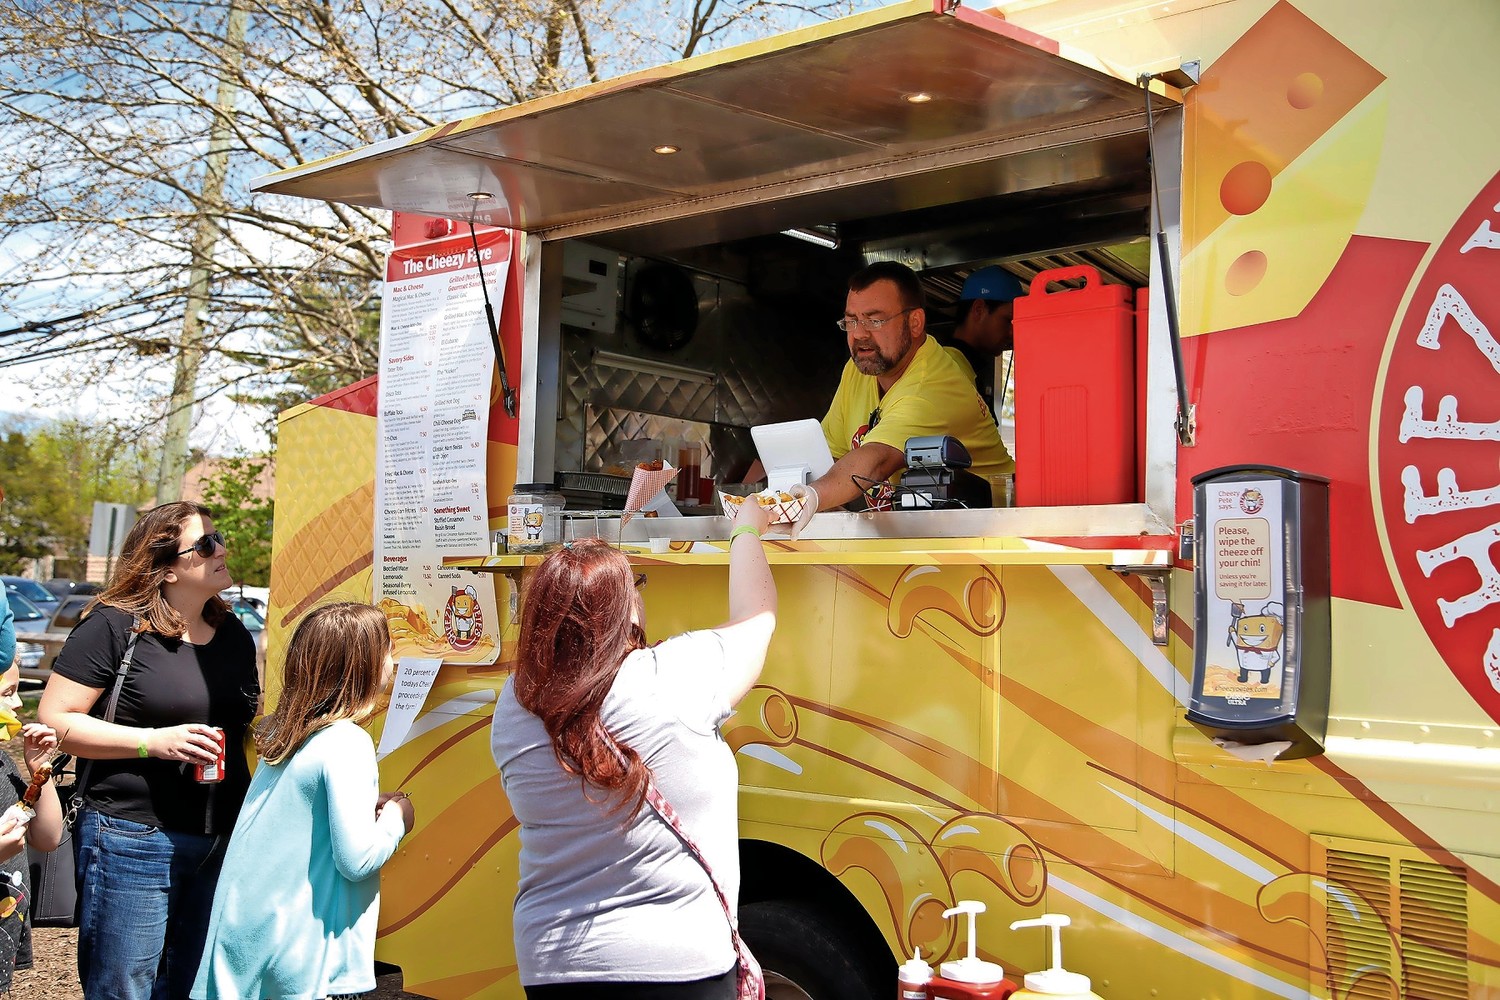 Crossroads Farm at Grossmann’s will host their Food Truck Rodeo on Friday, from 5 to 9 p.m.